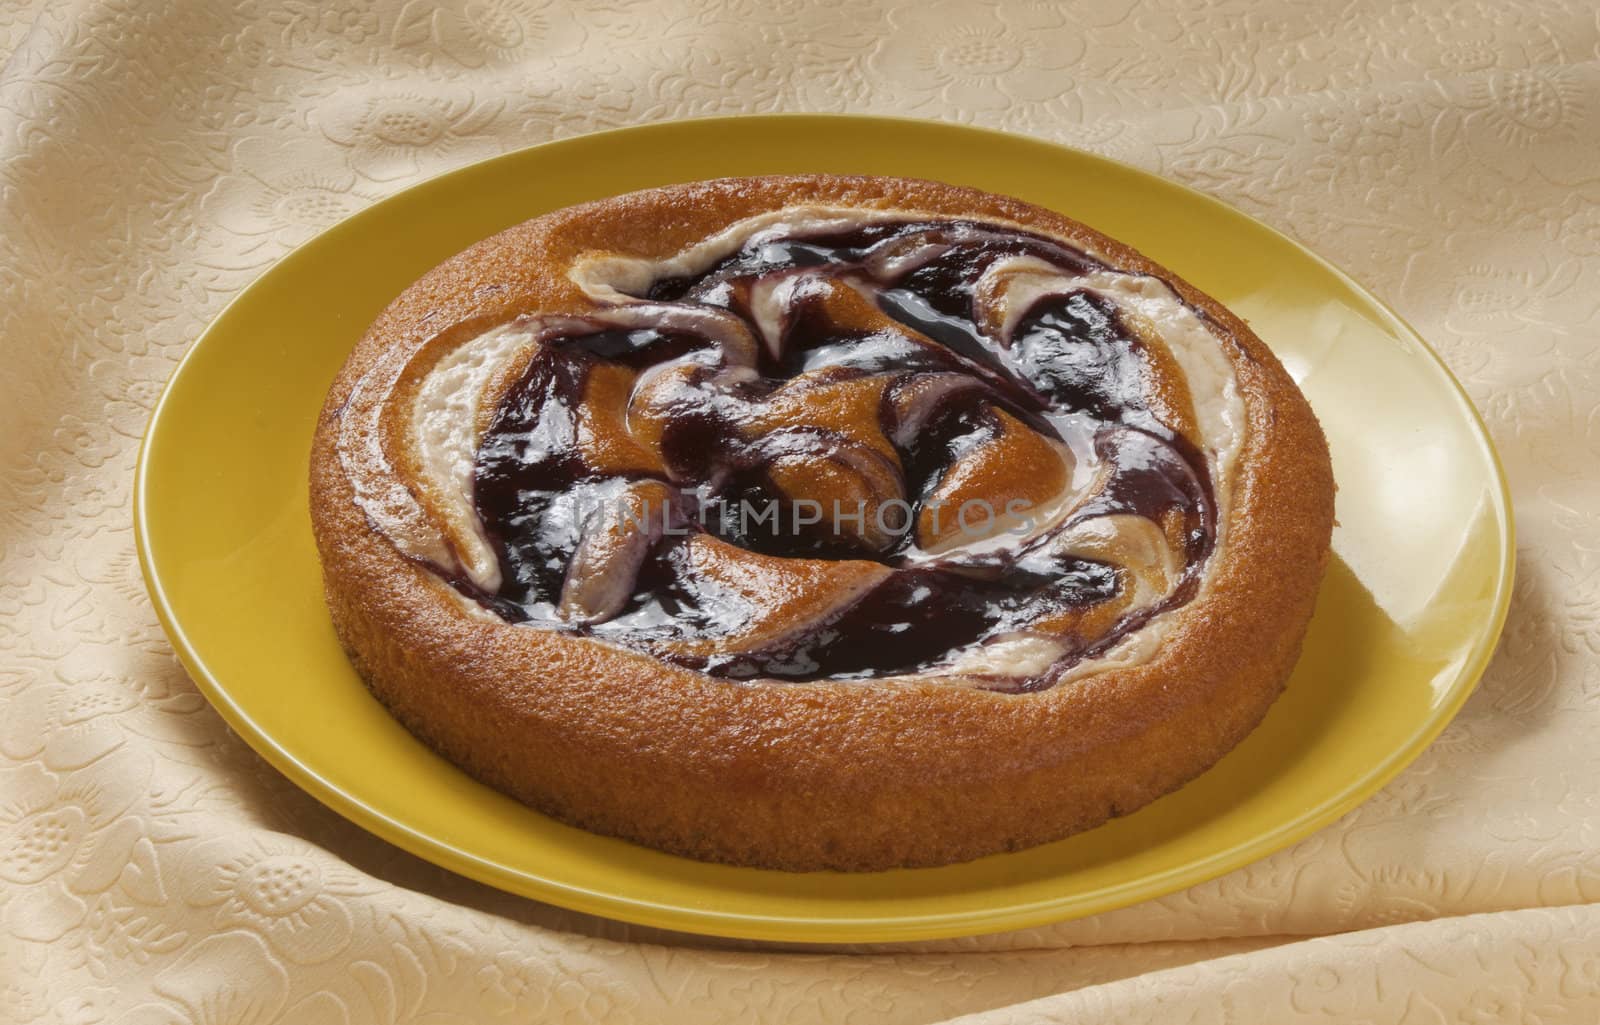 Bilberries cake on the yellow plate on the tablecloth